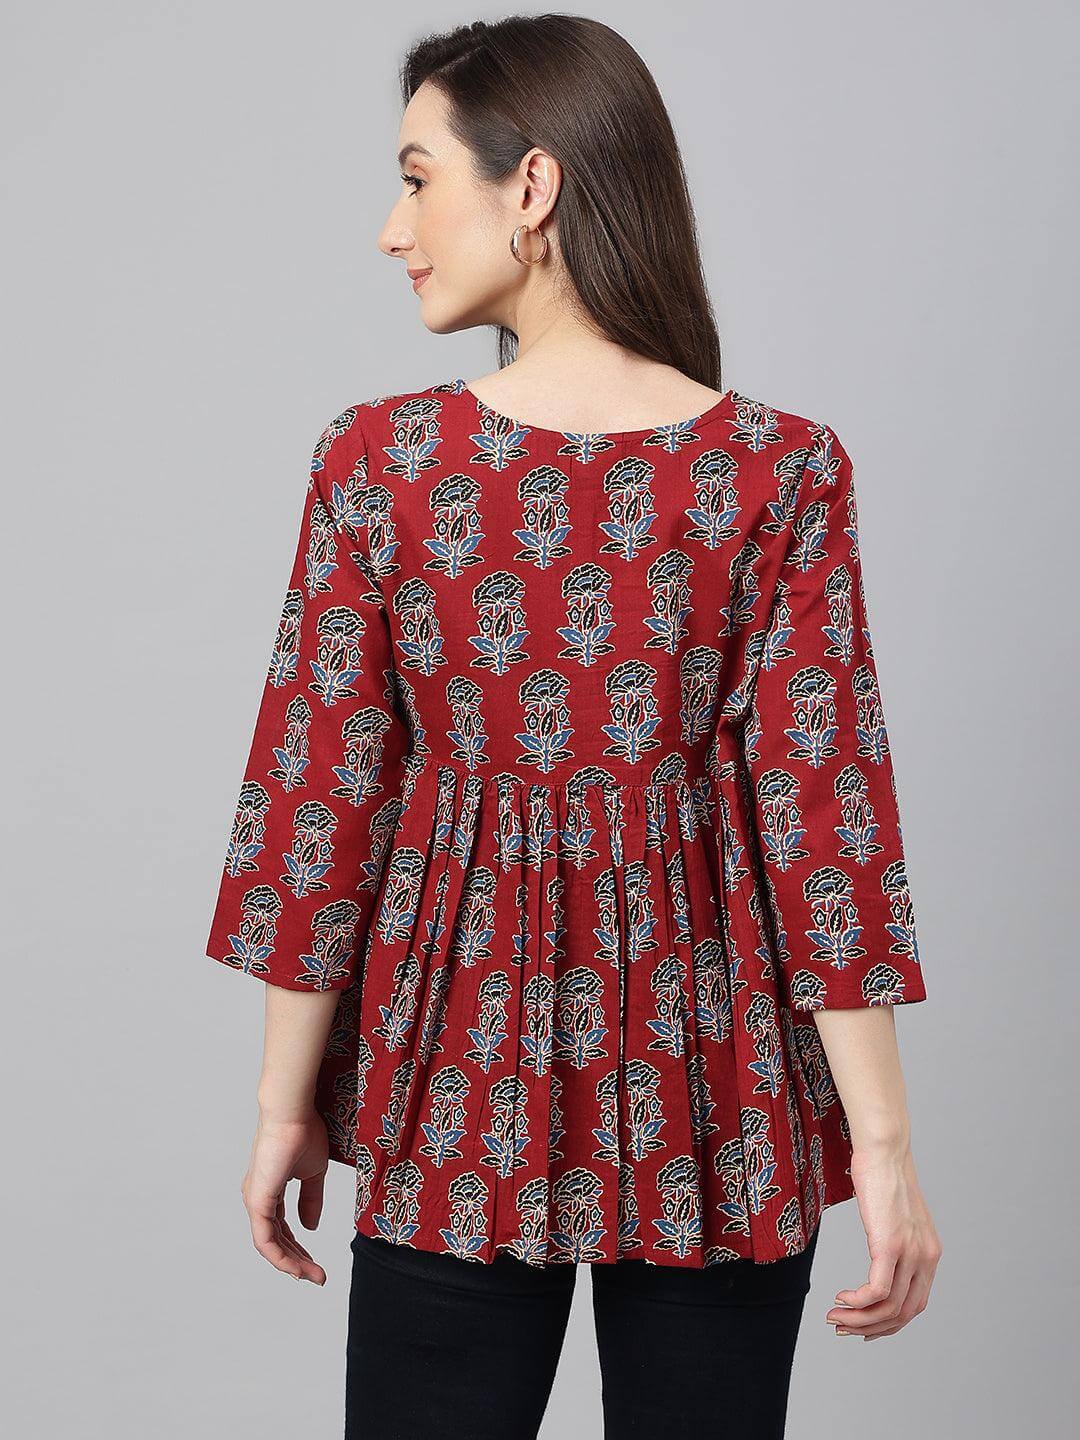 Women's Maroon Cotton Floral Block Print Flared Top